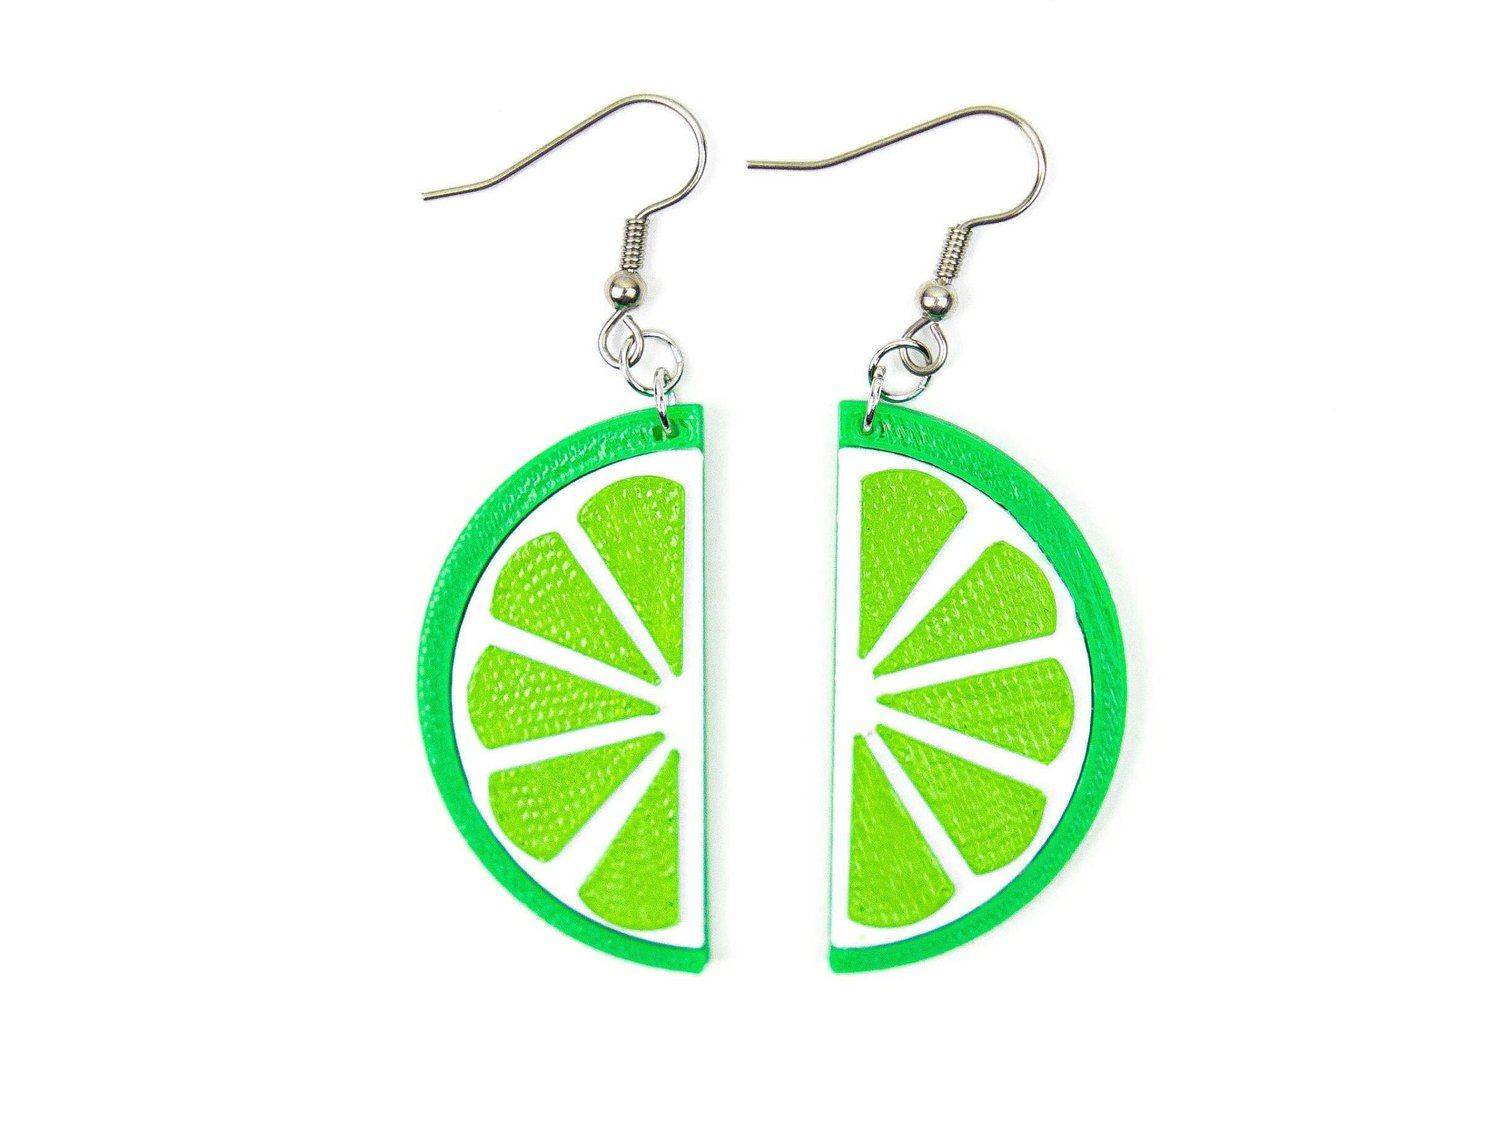 3D printed lime dangle earrings / Lightweight bright summer beach earrings  of eco-friendly plant-based plastic - Studs